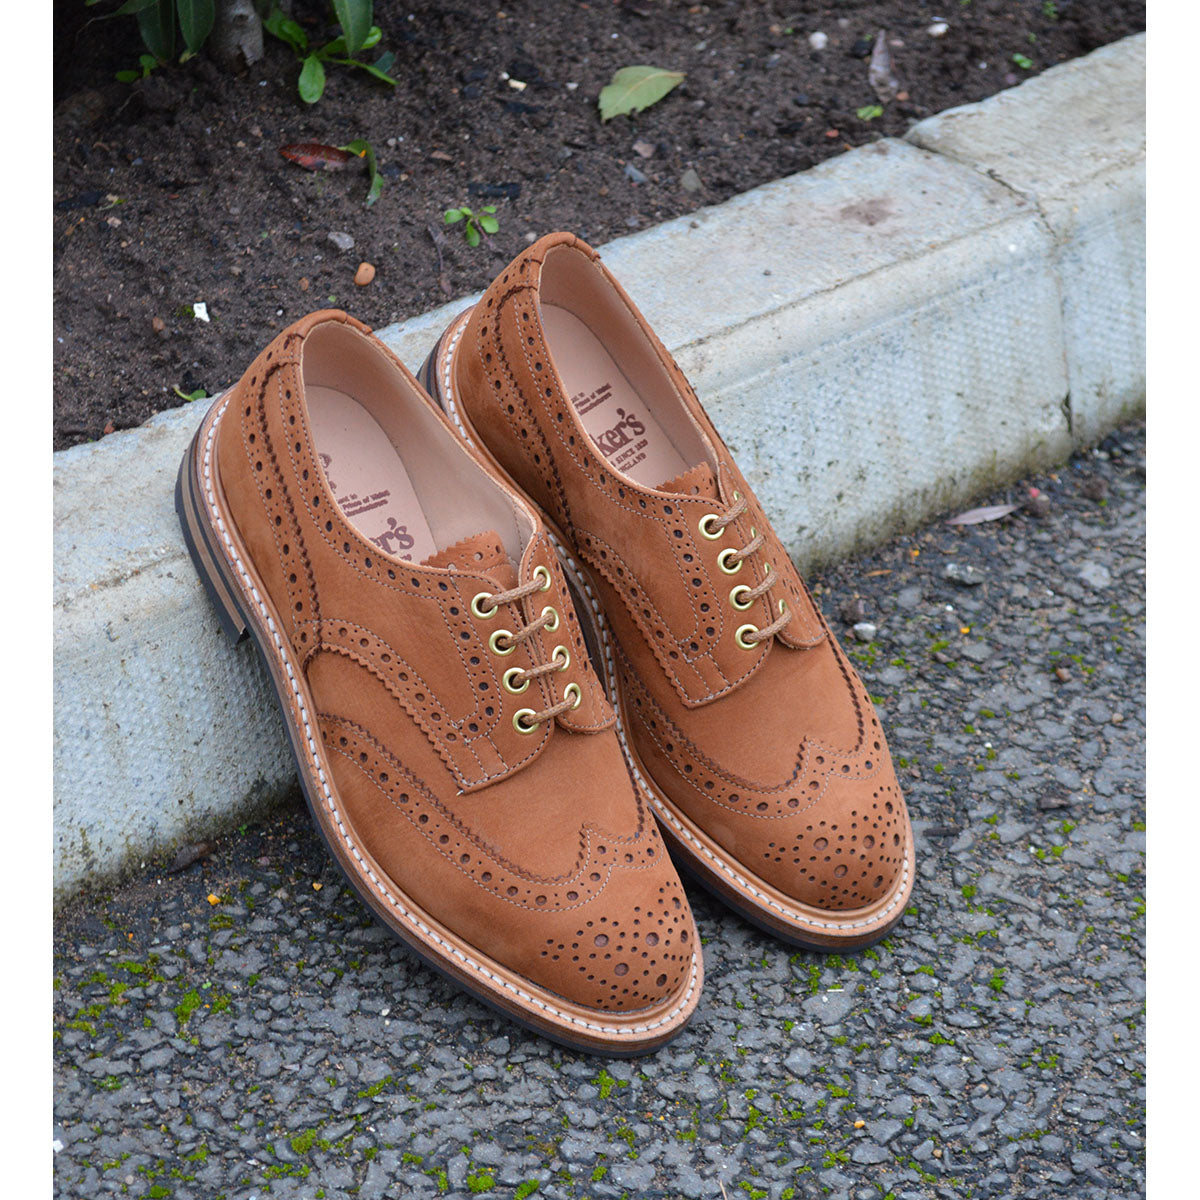 Trickers Bourton - Whisky Hydro Nubuck – A Fine Pair of Shoes